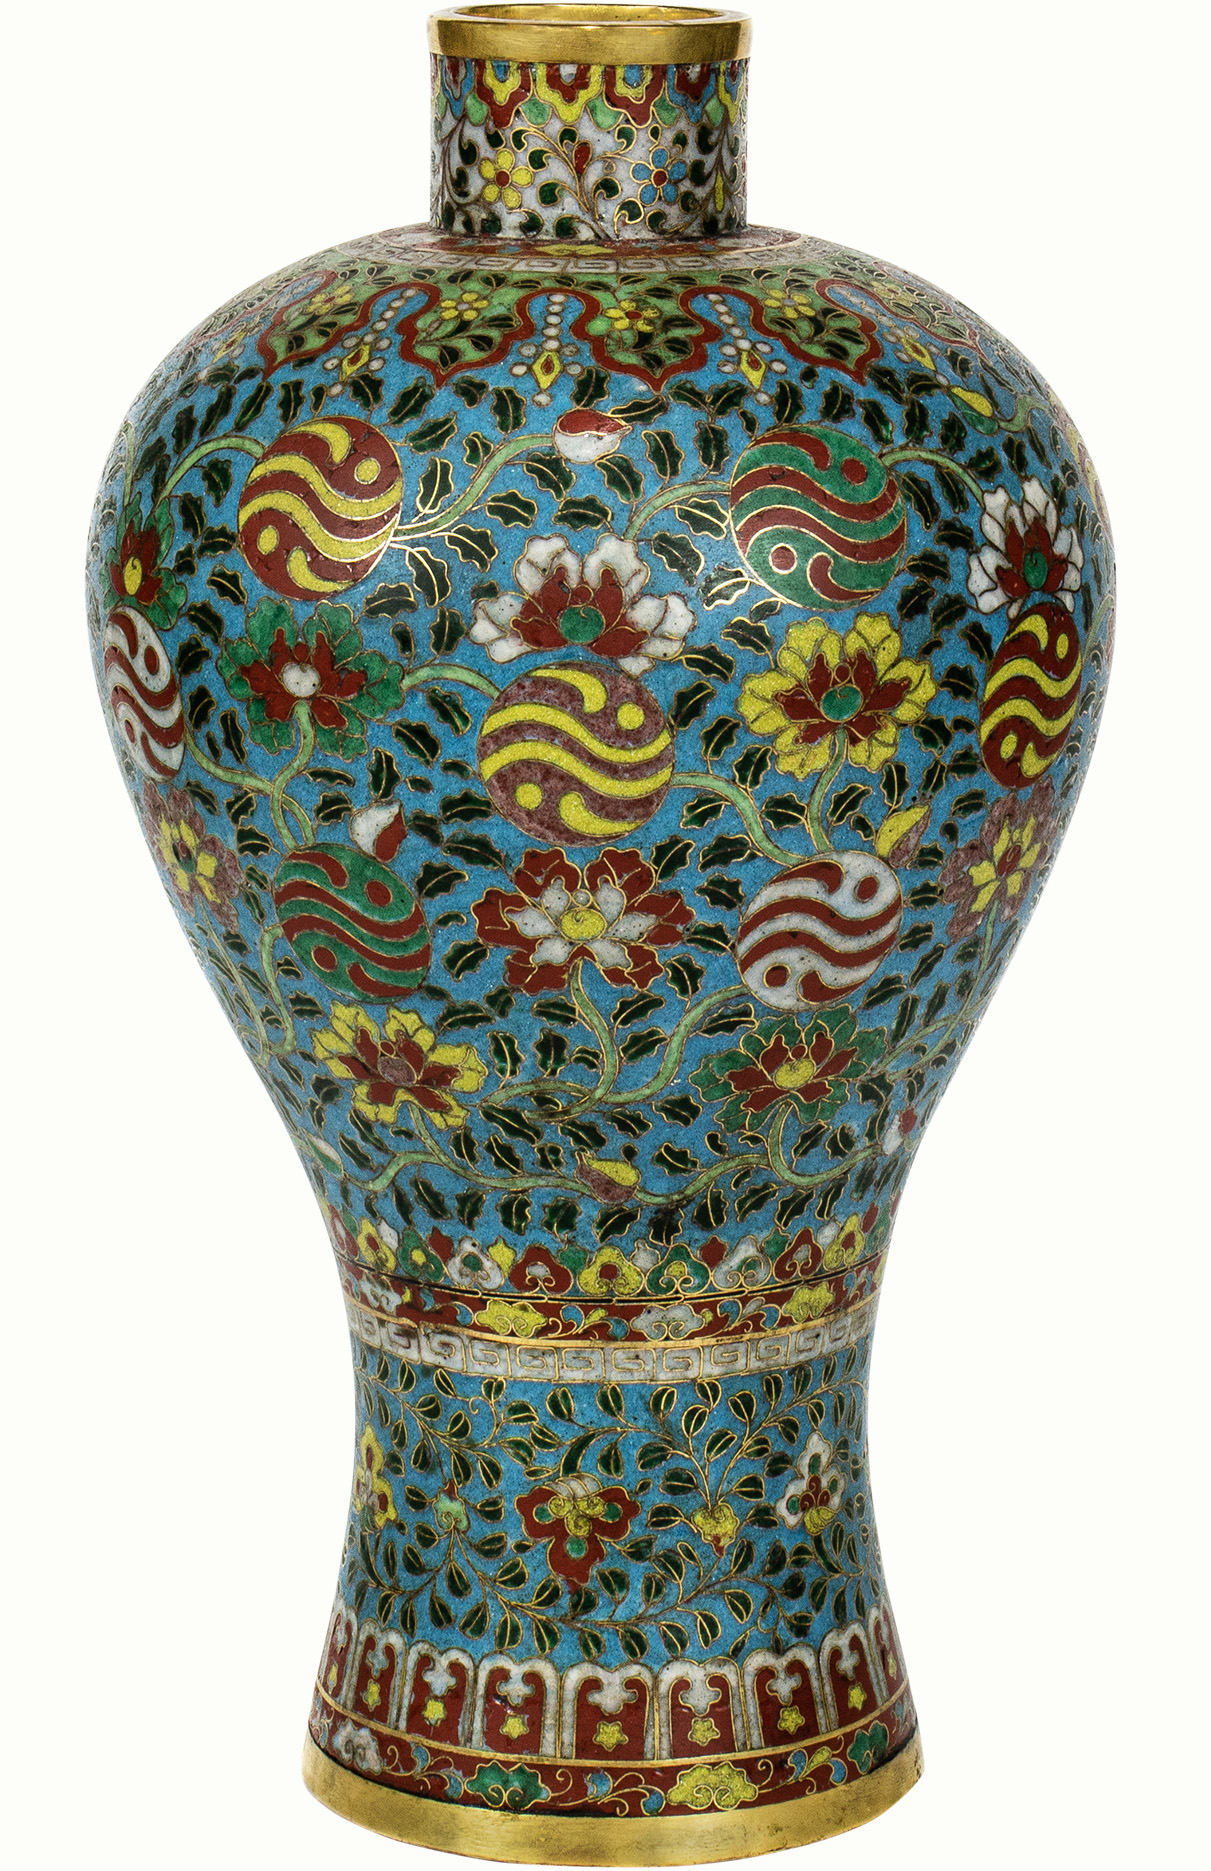 A Chinese cloisonné enamel meiping vase.